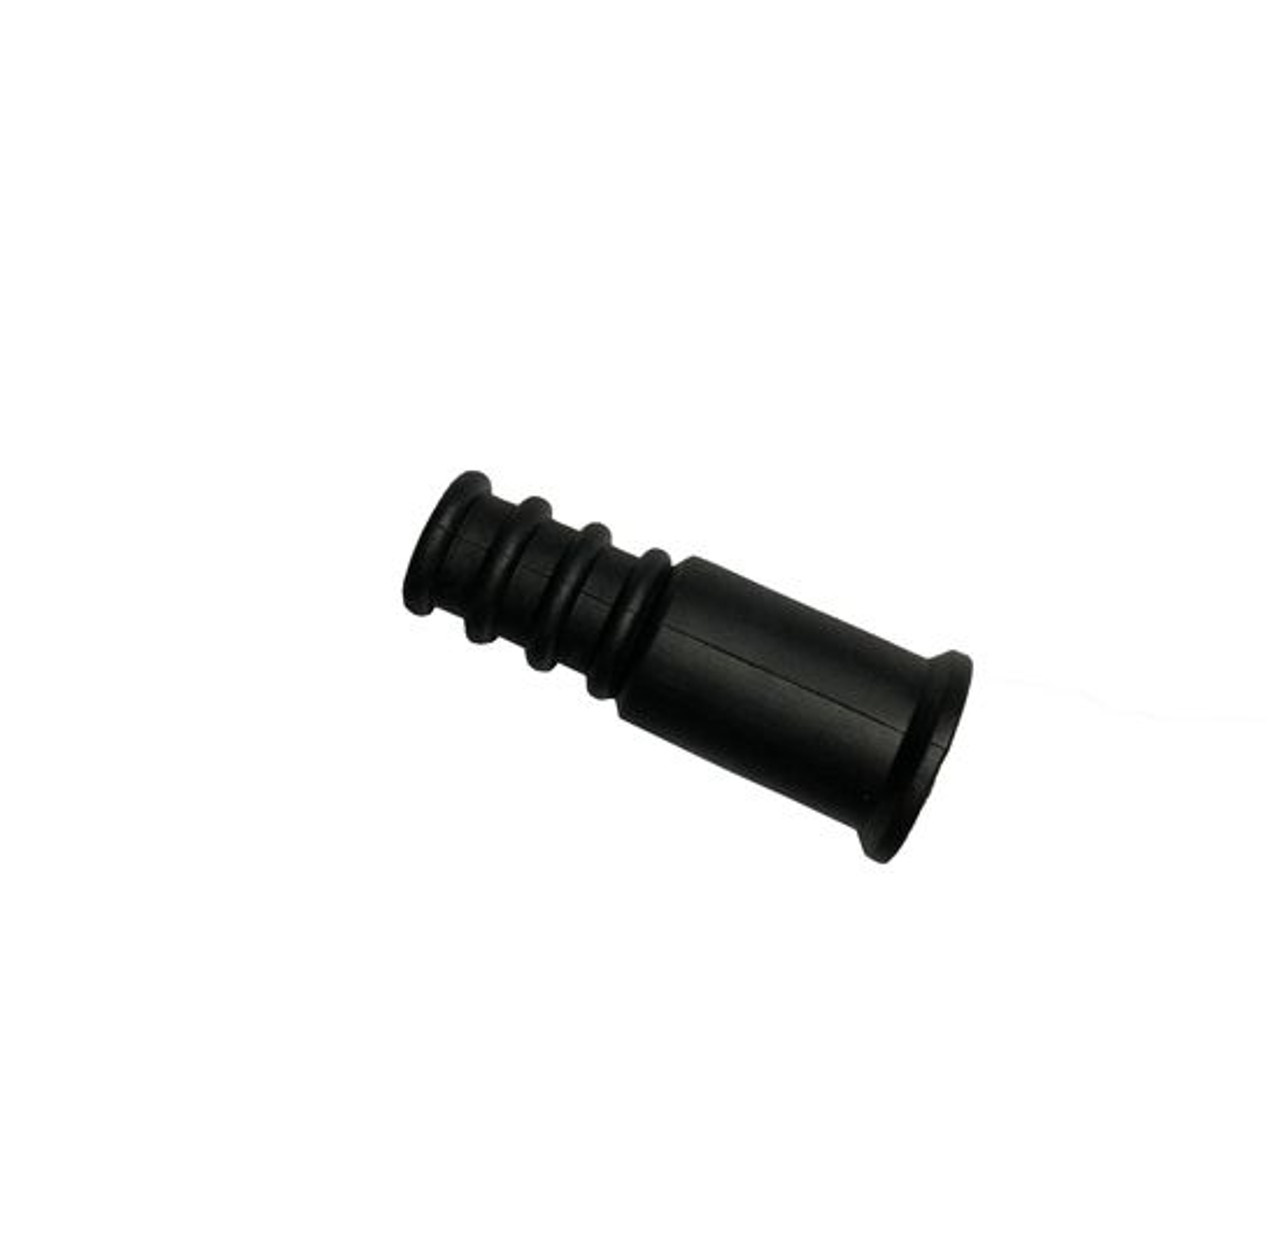 Steren 200-976BK Weather Boot Coaxial Connector RG59 RG6 Black Outdoor 1 Pack Single Moisture Water Tight Rubber Boot RG-59 RG-6 Coax Cable End Over Boot Cover, Part # 200976-BK